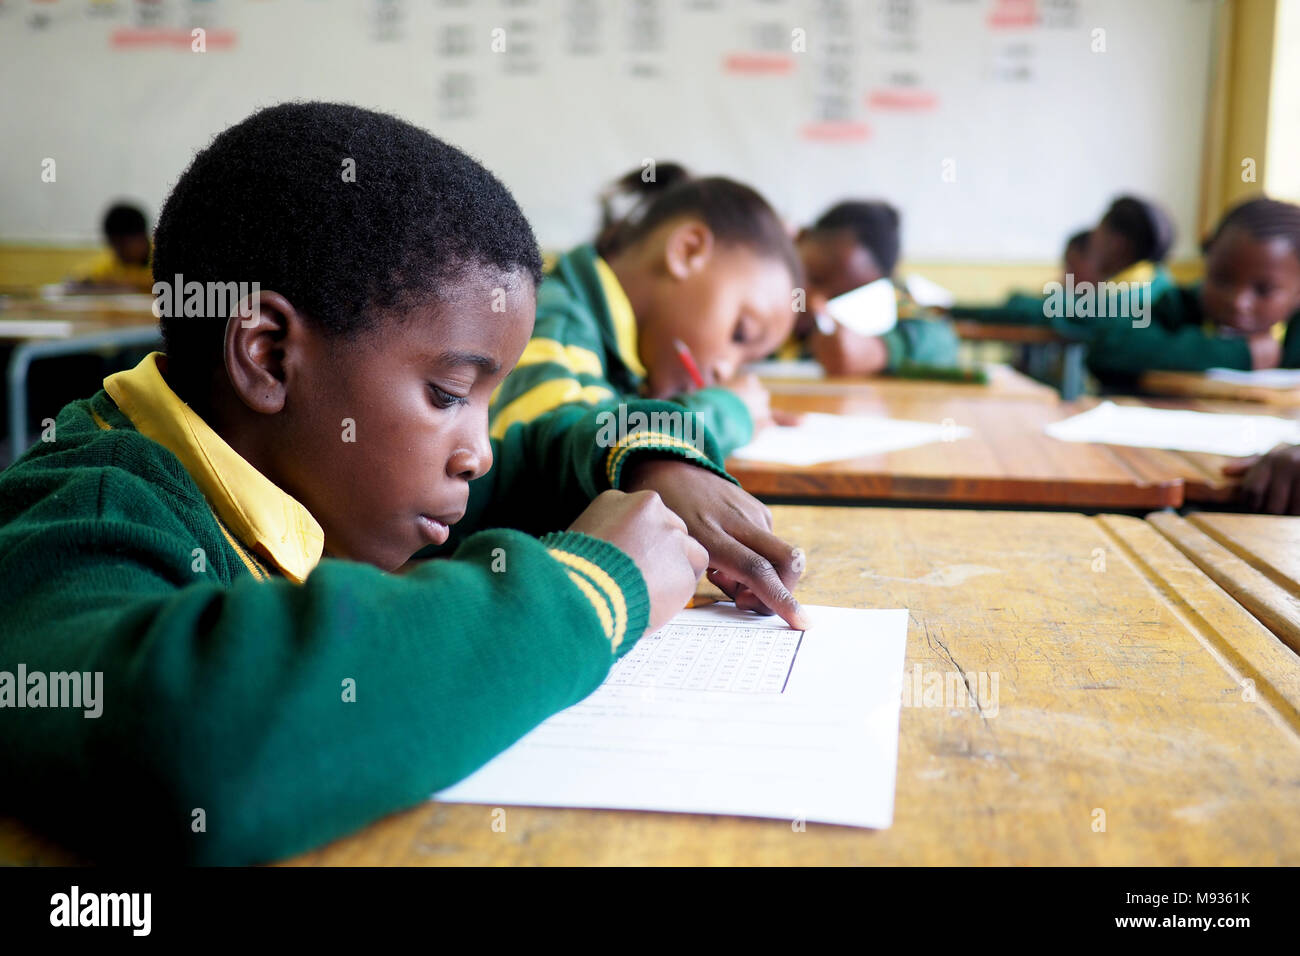 Young boy in a poor school in South Africa Stock Photo